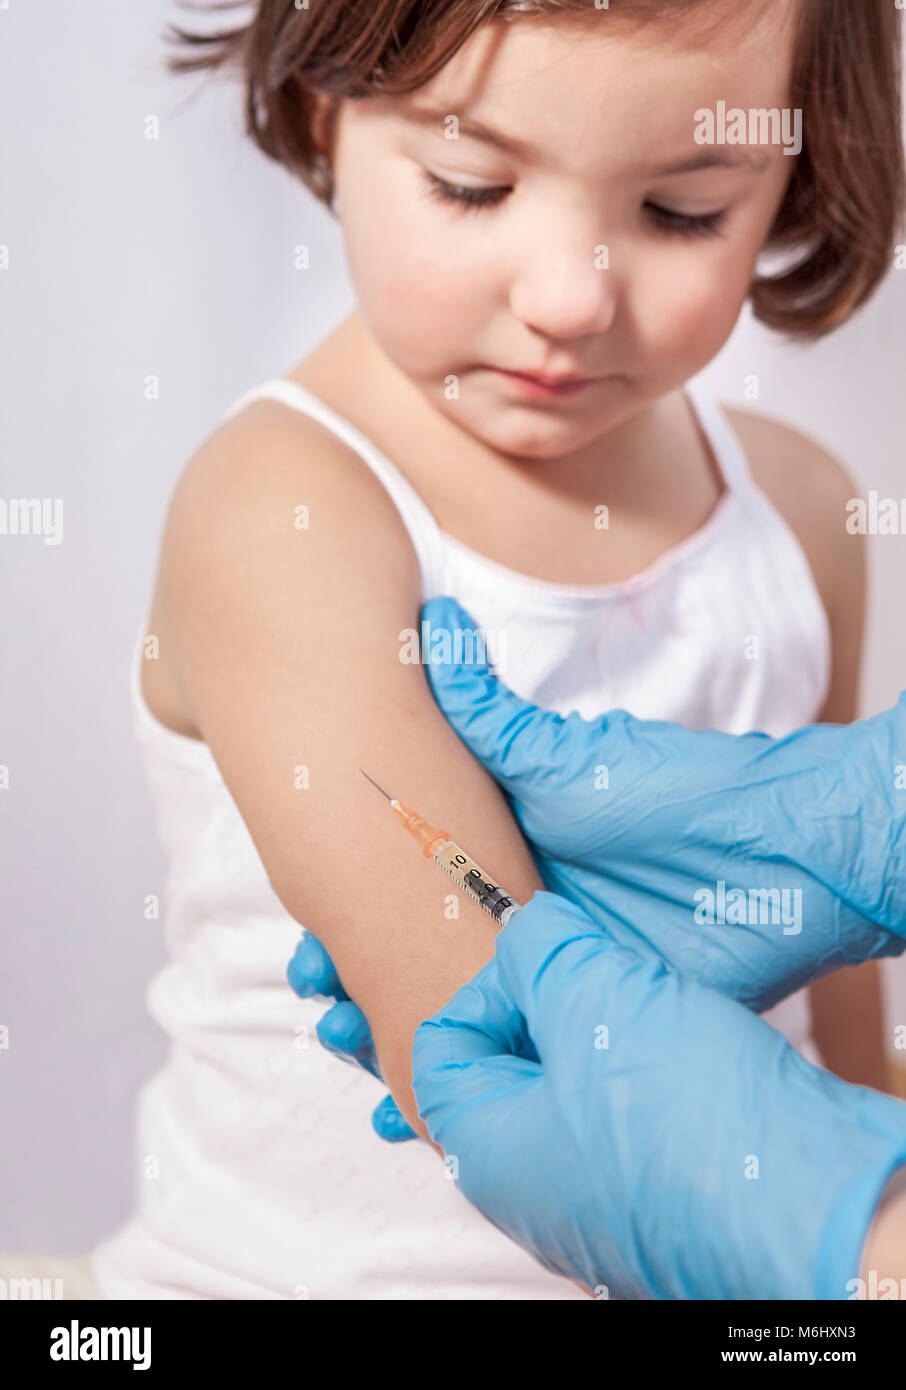 Nurse vaccinating 3 years old little girl. She is relaxed and trusting Stock Photo